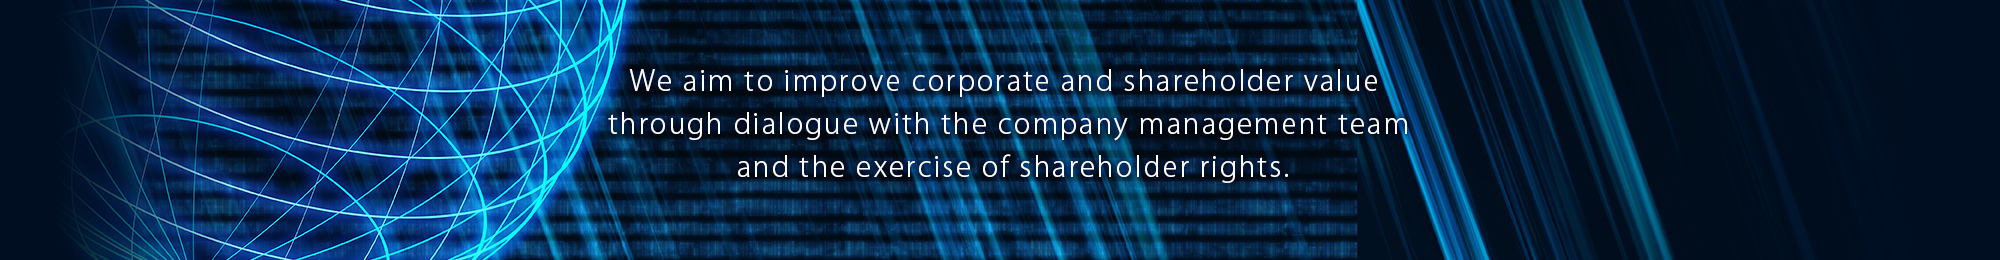 We aim to improve corporate and shareholder value through dialogue with the company management team and the exercise of shareholder rights.